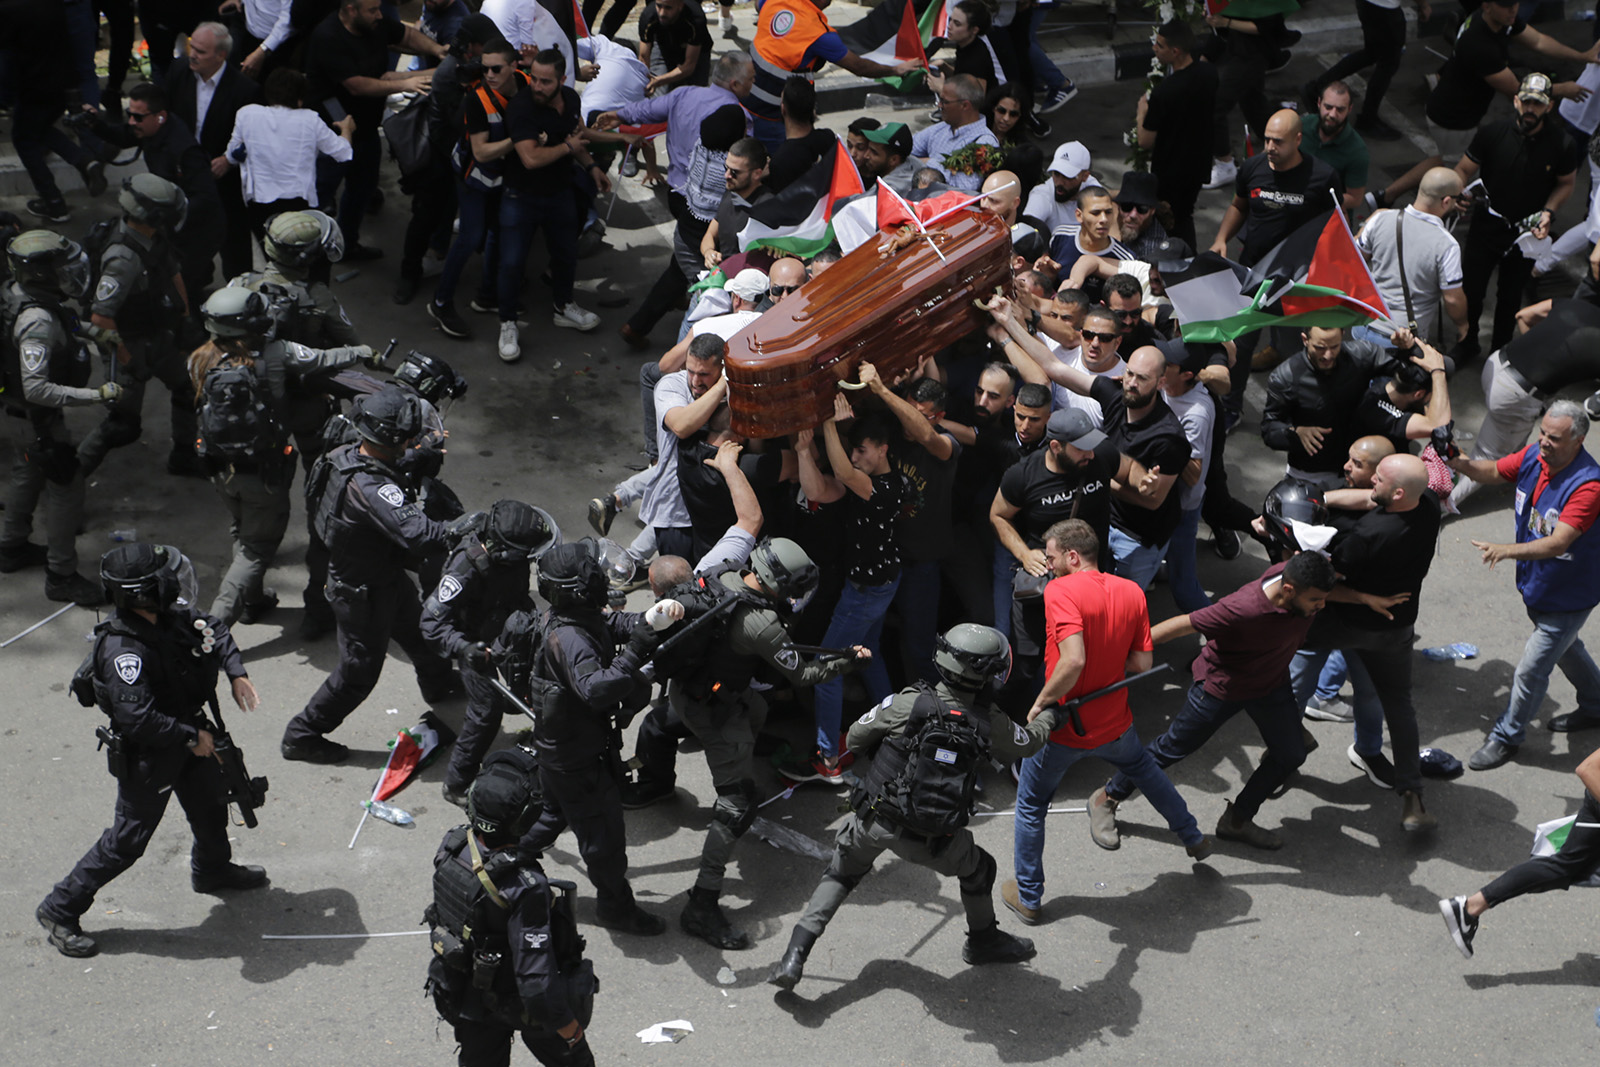 Israeli police confront mourners as they carry the casket of slain Al Jazeera veteran journalist Shireen Abu Akleh during her funeral in east Jerusalem, Friday, May 13, 2022. Abu Akleh, a Palestinian-American reporter who covered the Mideast conflict for more than 25 years, was shot dead Wednesday during an Israeli military raid in the West Bank town of Jenin. (AP Photo/Maya Levin)